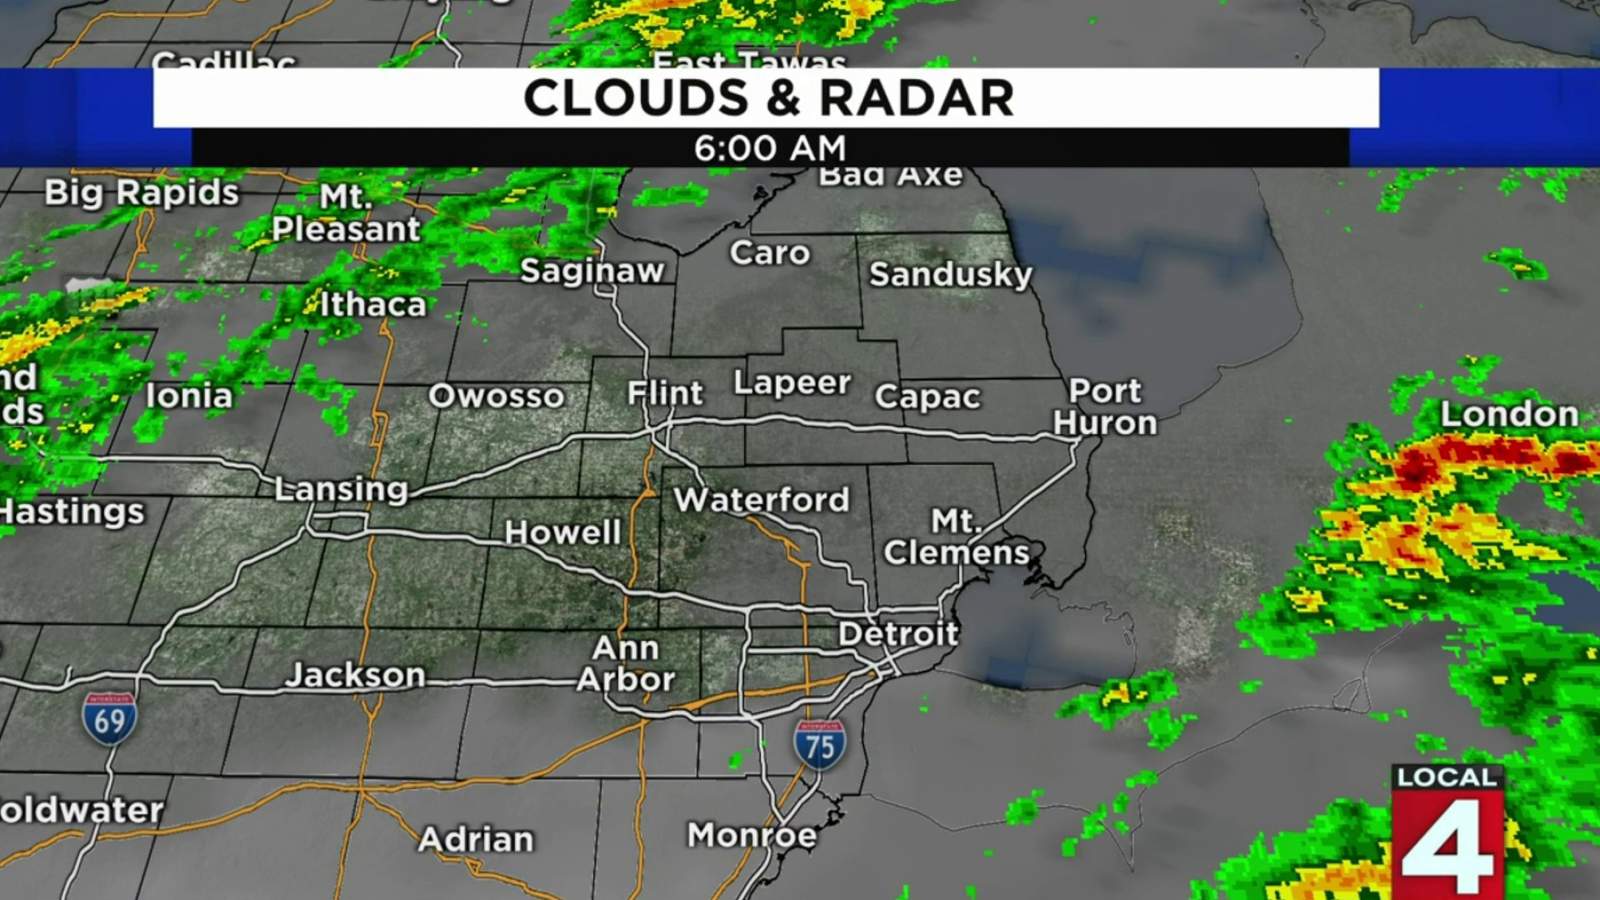 Metro Detroit weather: Showers possible today, holiday weekend outlook